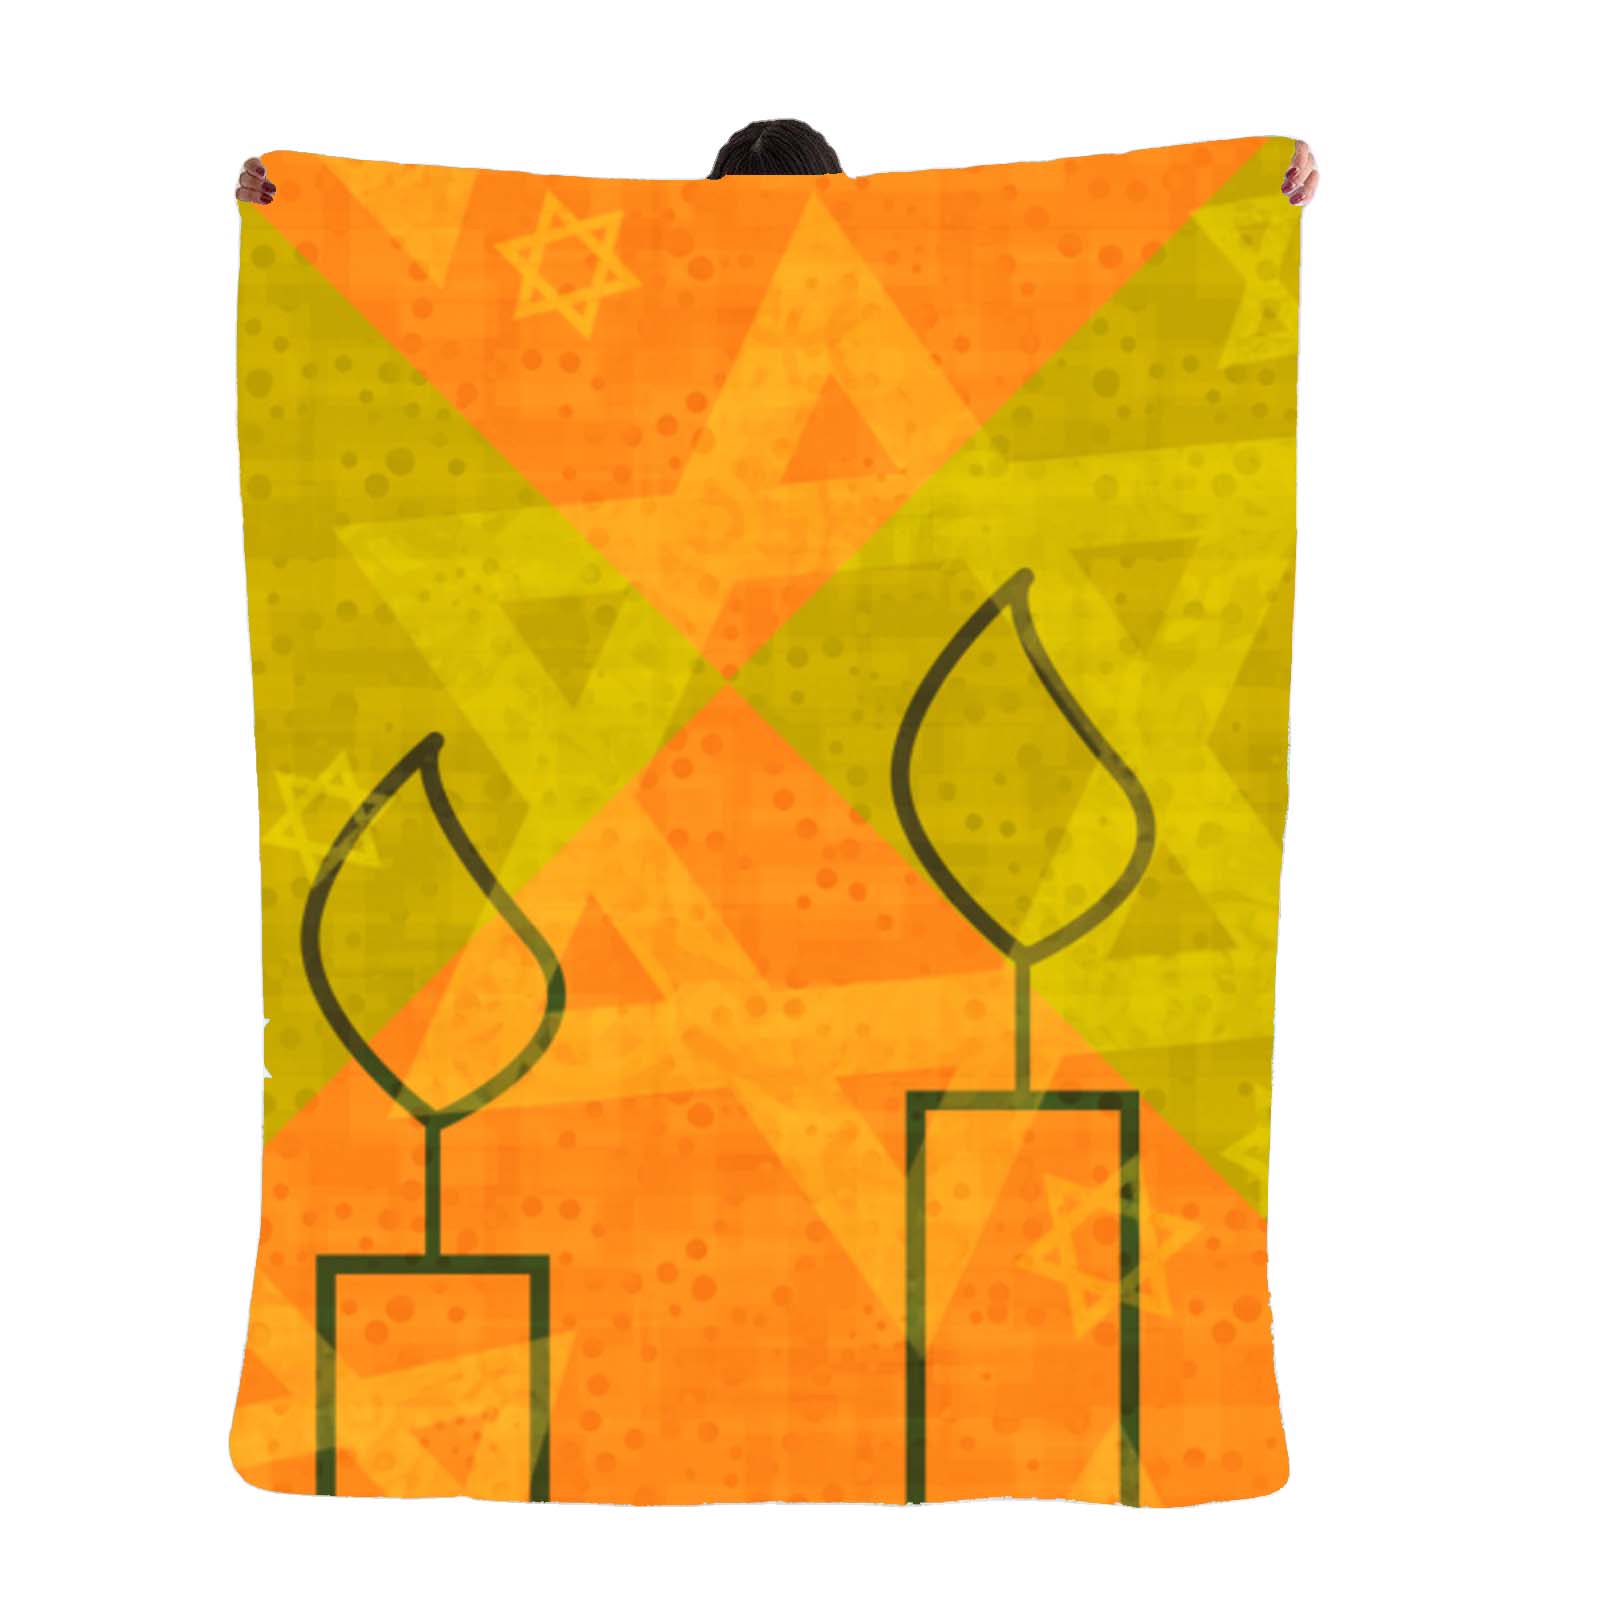 🔯🕎Candles and Star of David - 30x60 beach towel , 50x60 Blanket .. FREE SHIPPING